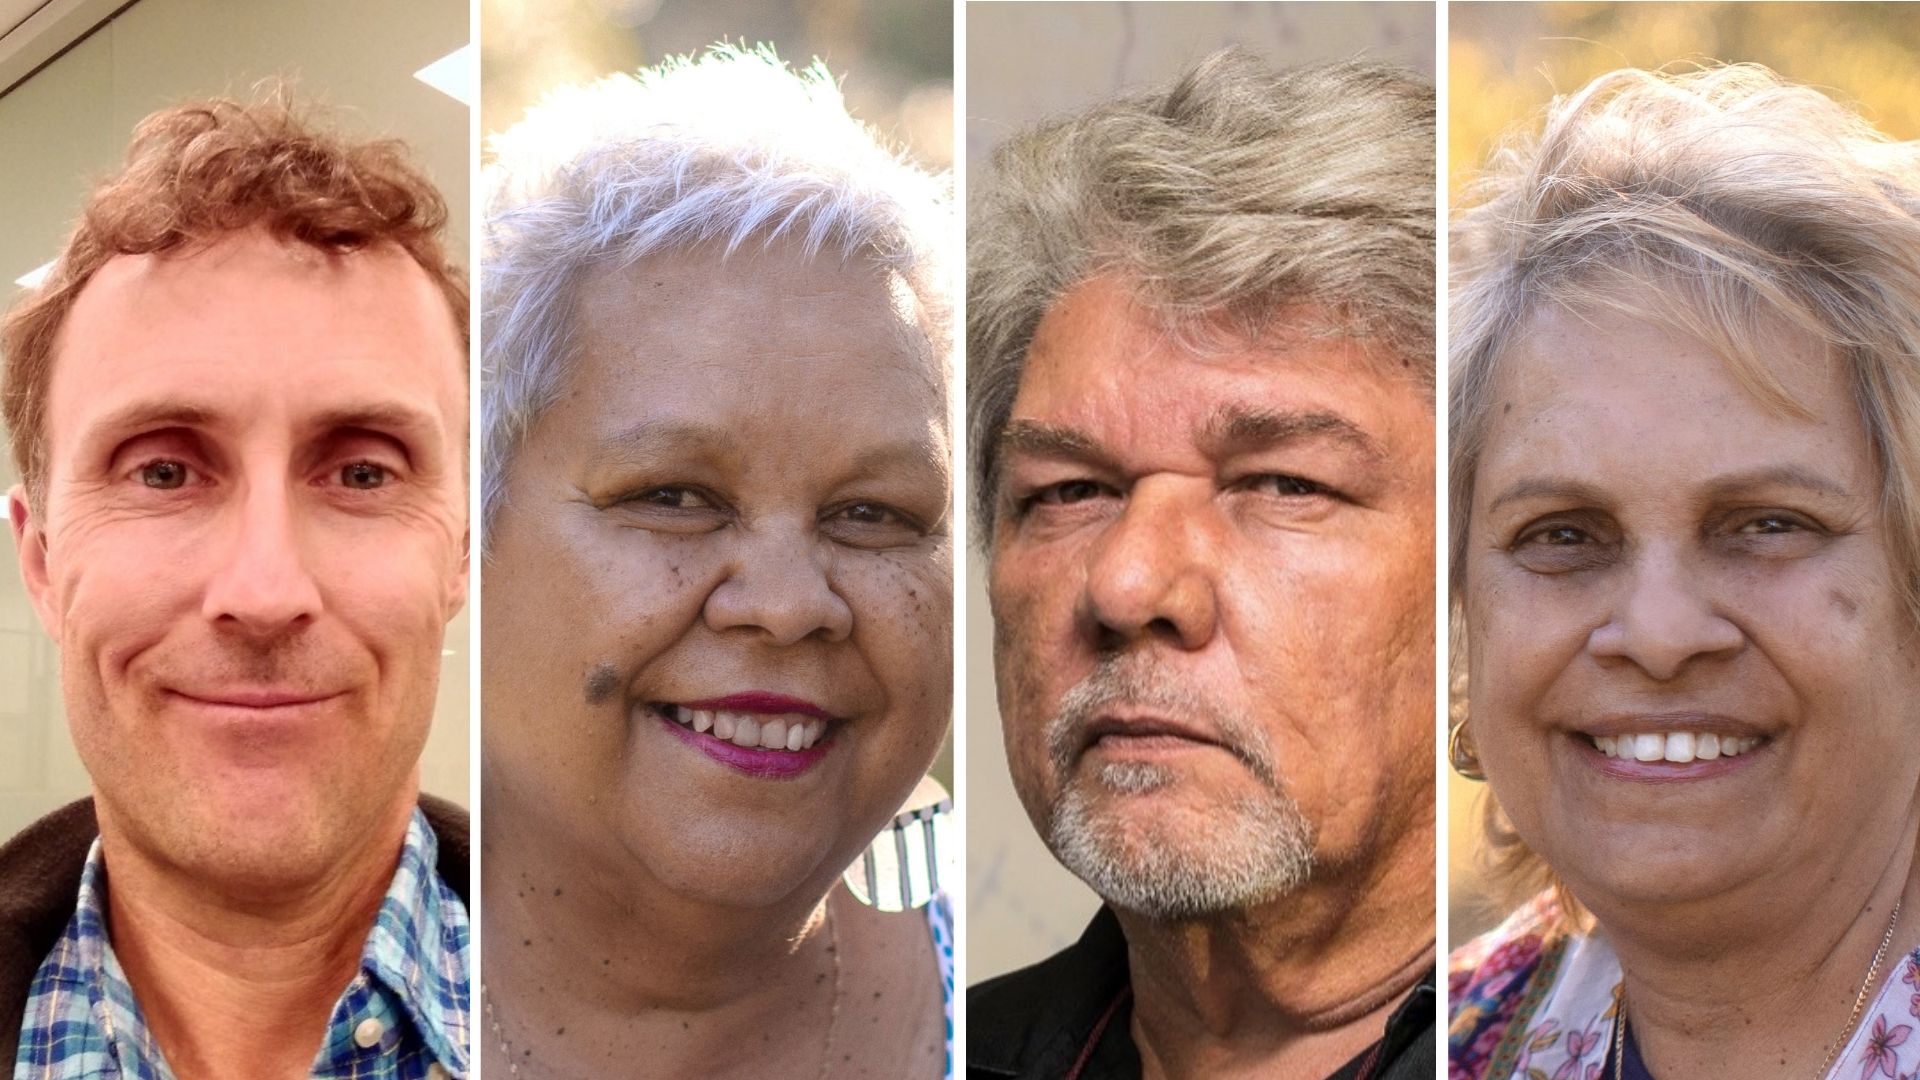 Four head shots in a line. Starts with a white middle aged man with short brown hair and slightly smiling. Second is a older woman with grey hair, dark skin and smiling. Third picture is an older man with grey hair, tanned skin with a neutral expression. And last headshot is a middle to later aged woman with blond-ish grey hair, tanned skin, and smiling. 